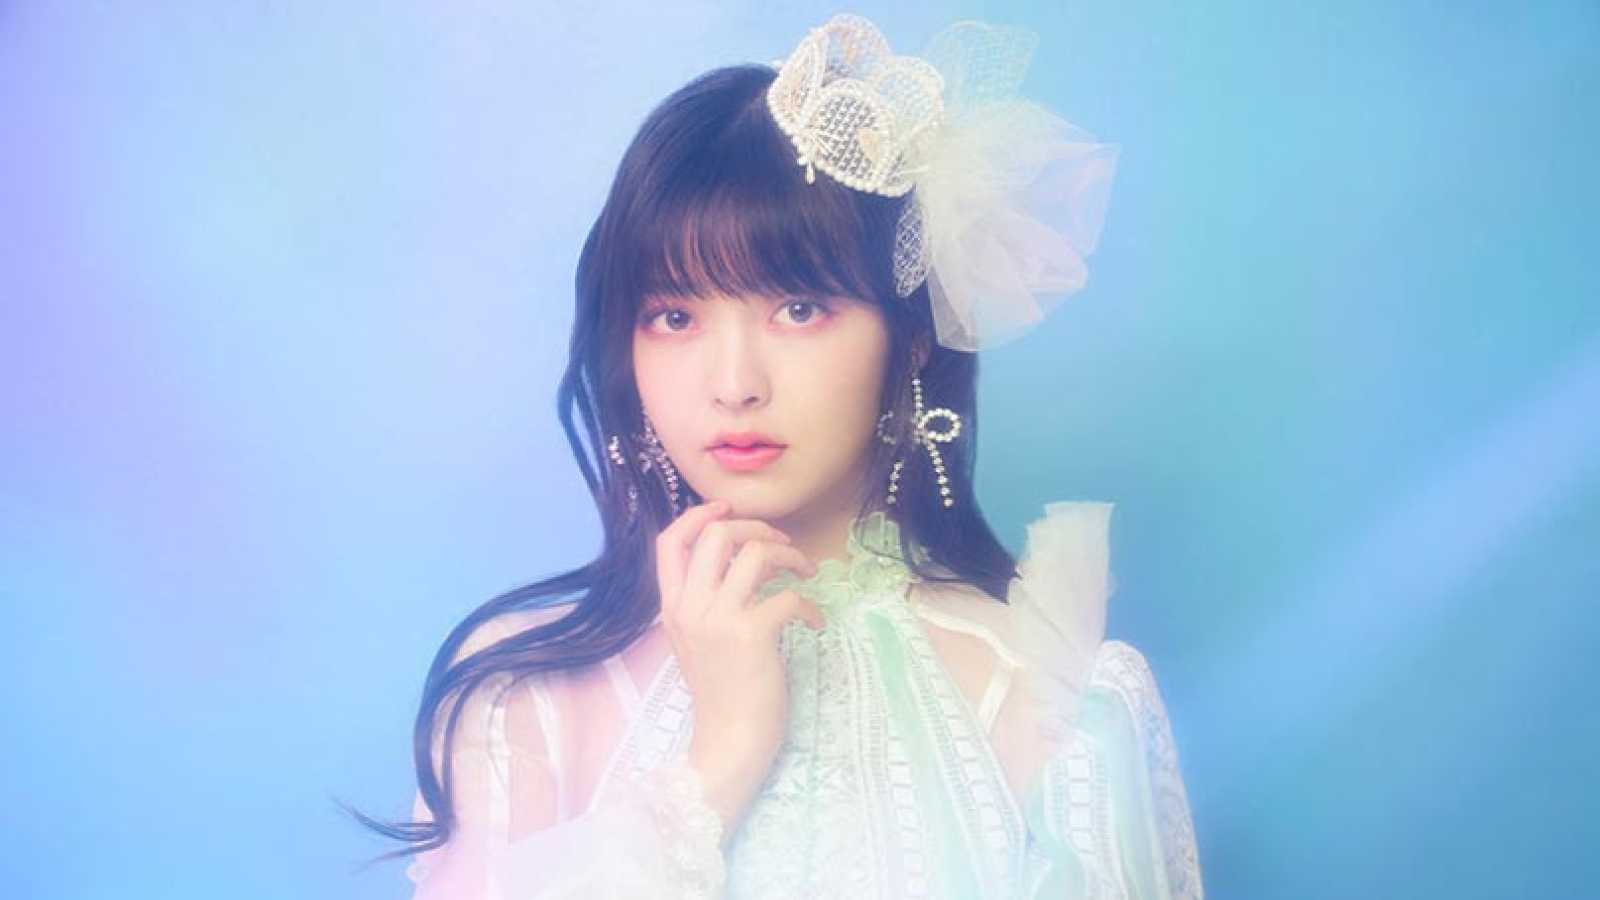 Sumire Uesaka to Release New Album Internationally © SPACE CRAFT GROUP. All rights reserved.